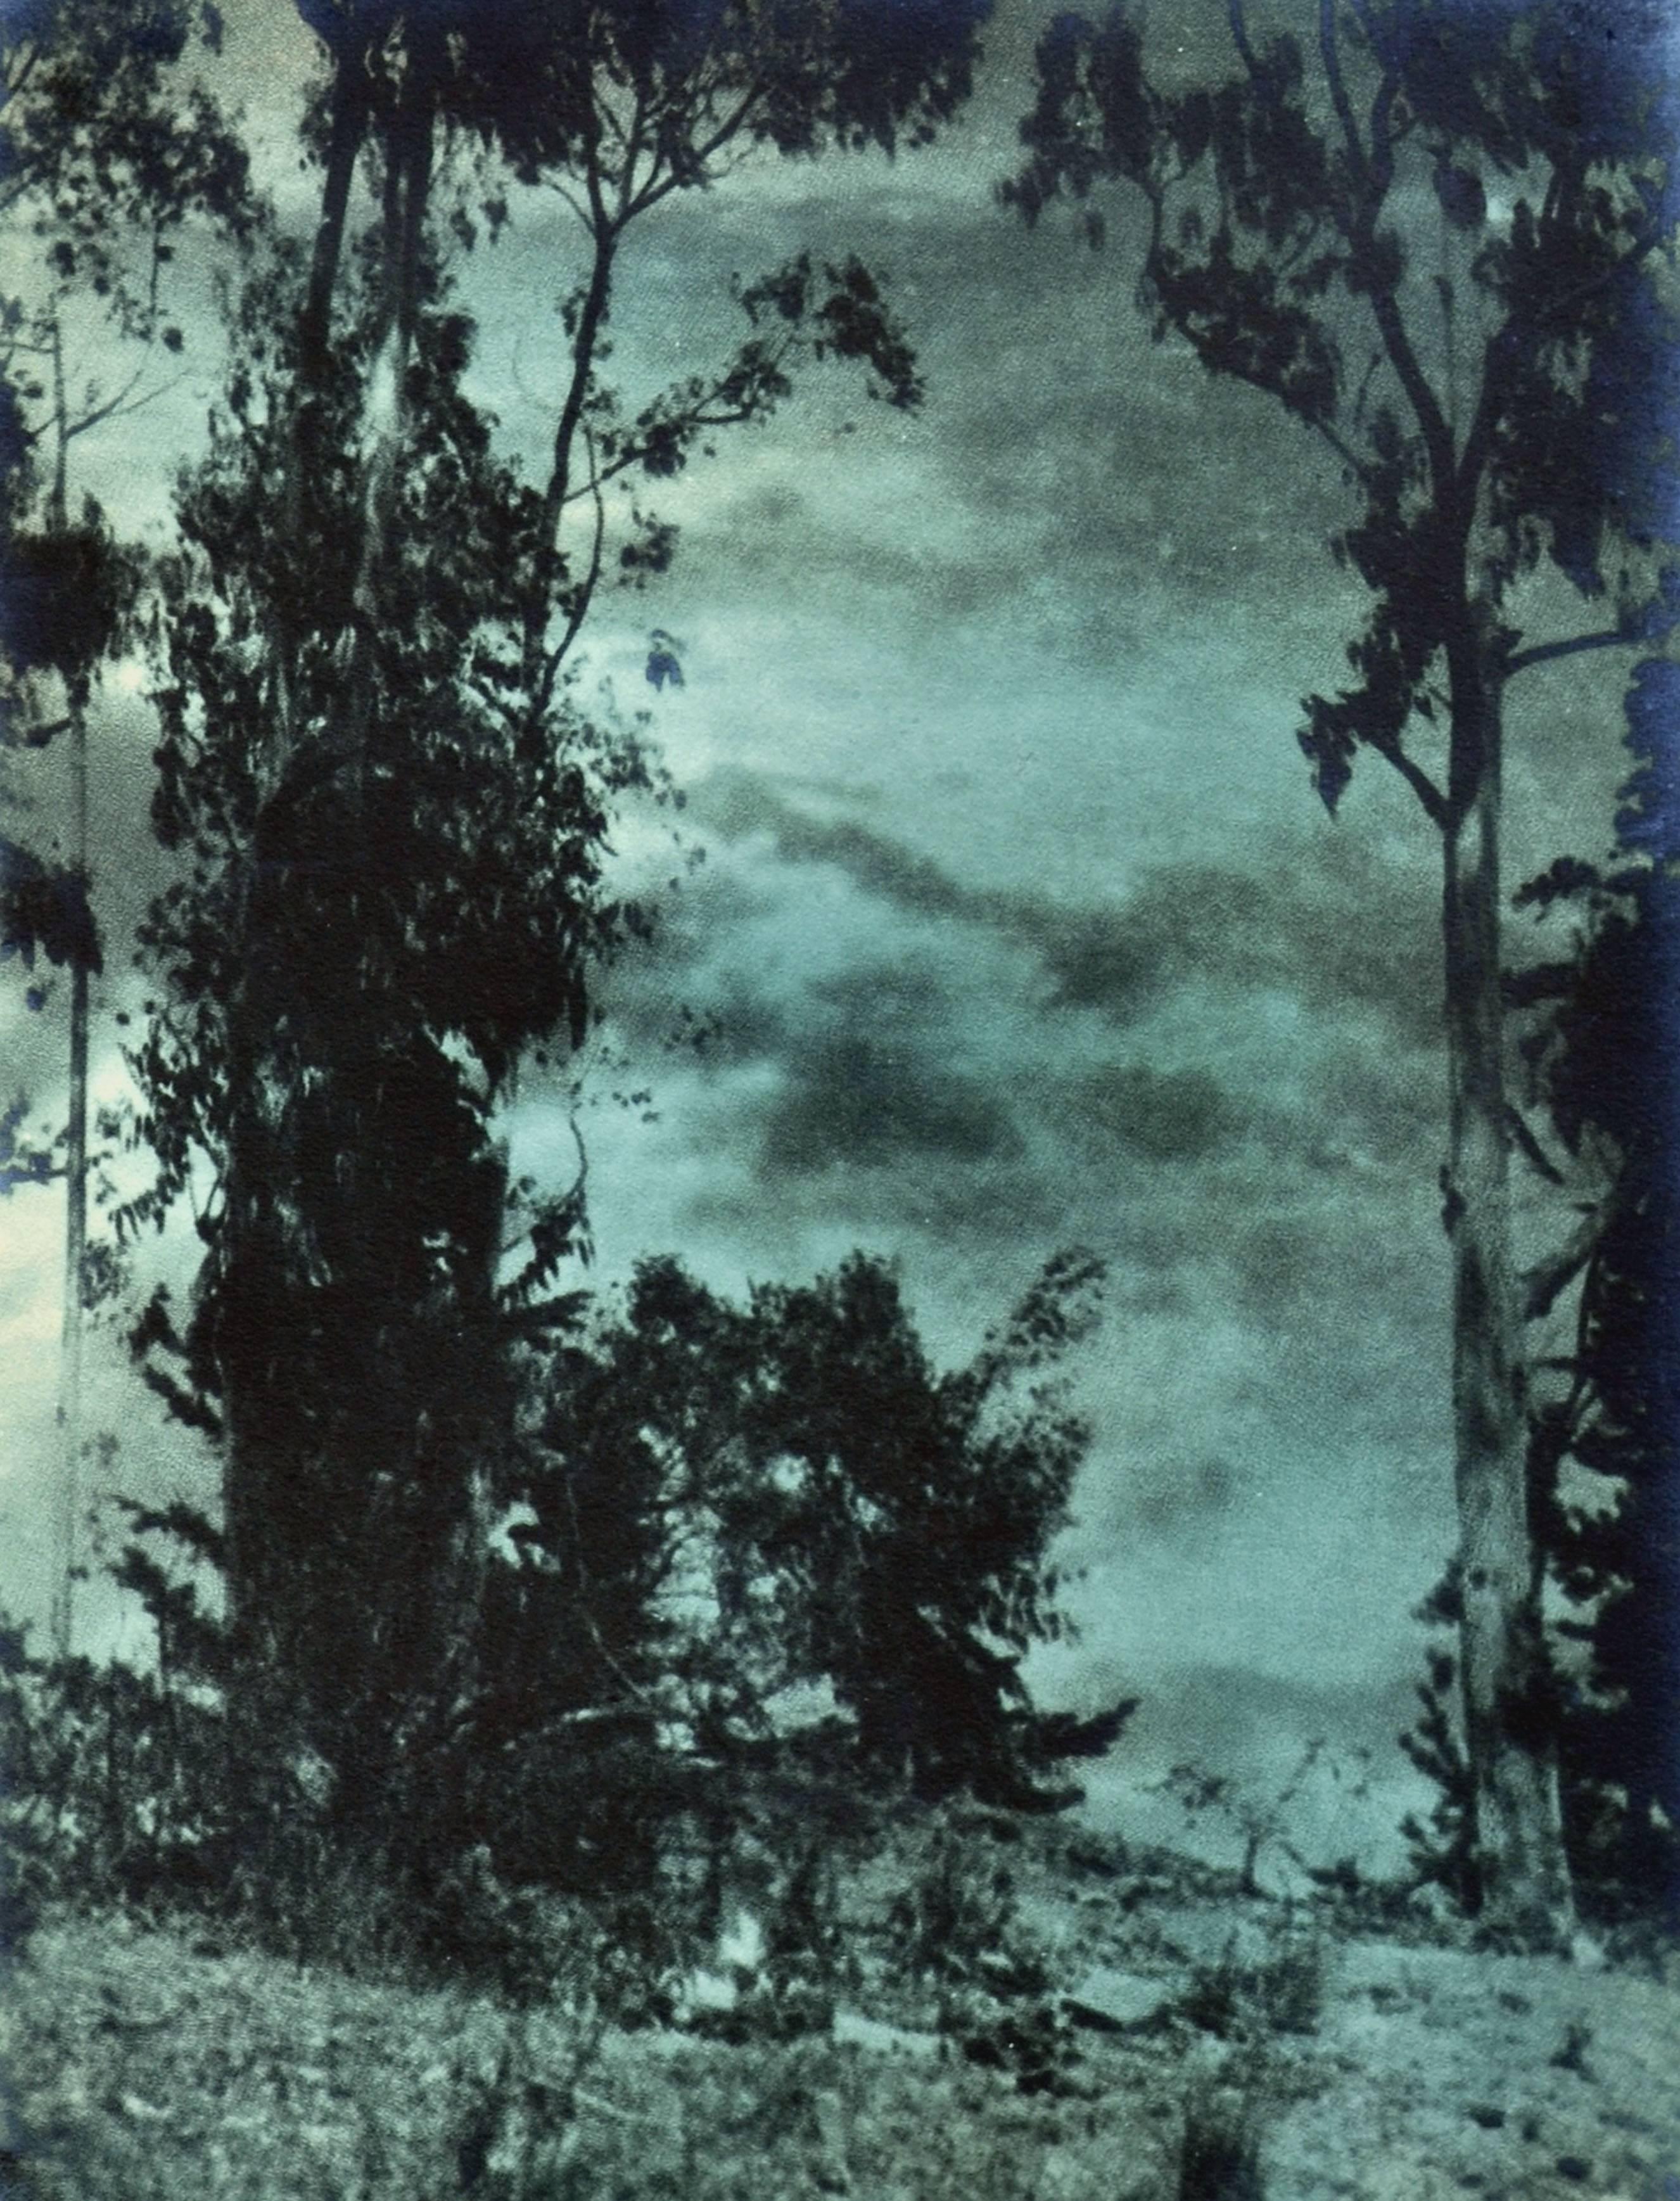 Early 20th Century Photograph Landscape --Looking Through The Sky - Gray Landscape Photograph by Sigismund Blumann